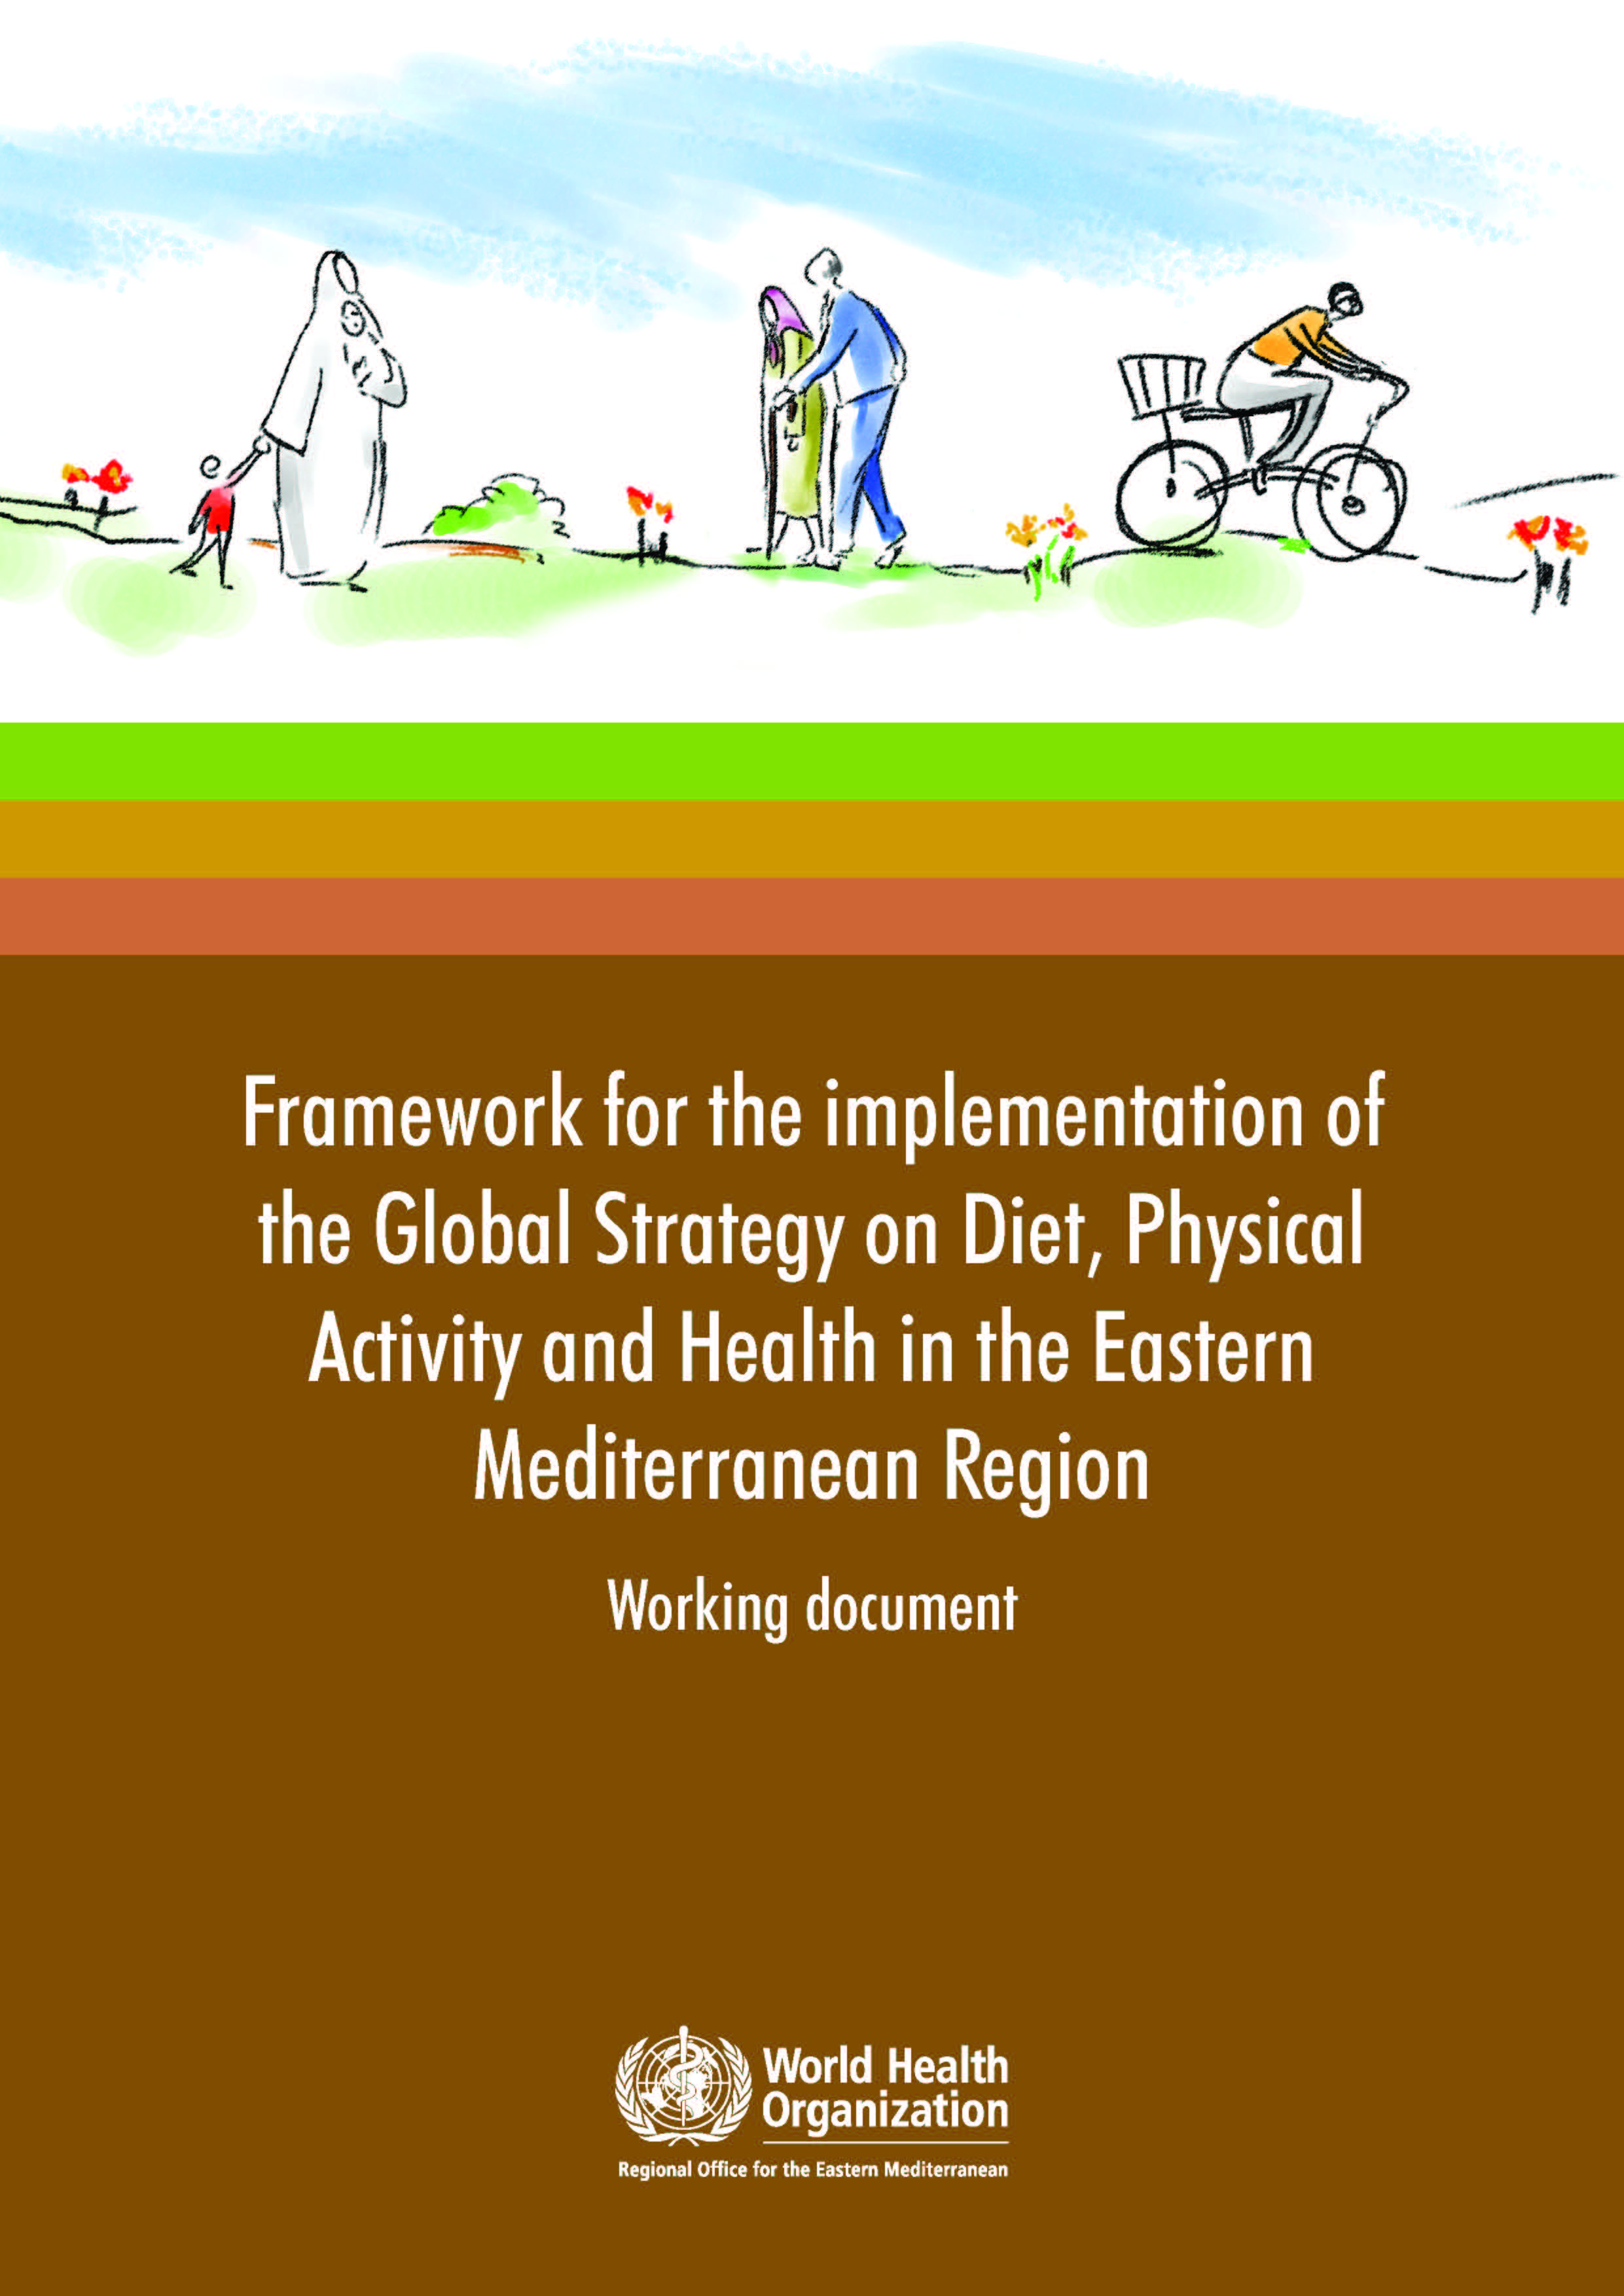 framework_for_the_implementation_of_the_global_strategy_on_diet_physical_activity_and_health_in_emr